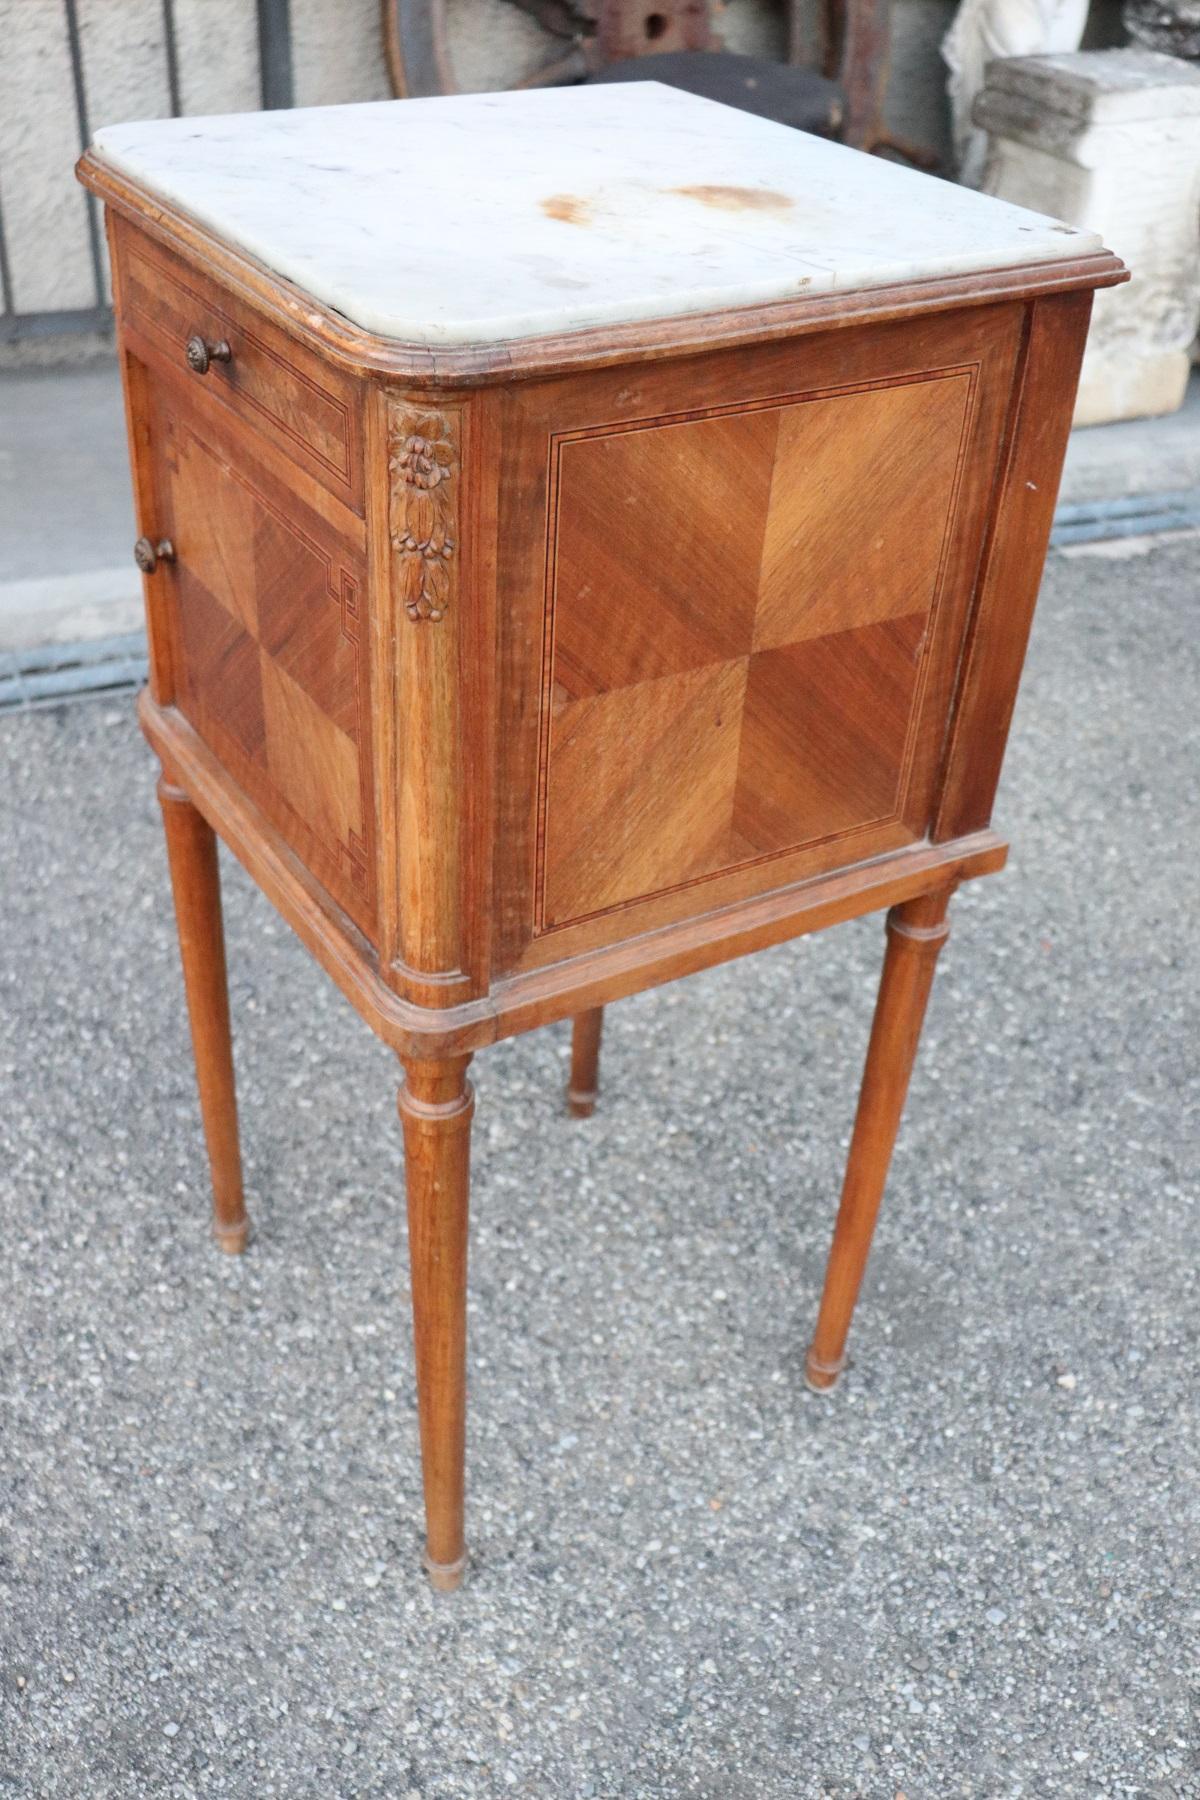 Rare and fine quality Italian Louis XVI style, 1930s side table or nightstand table. The table has a particular legs slender. Fine inlay marquetry decoration in precious rosewood. On the front one comfortable little drawer. White marble top. The